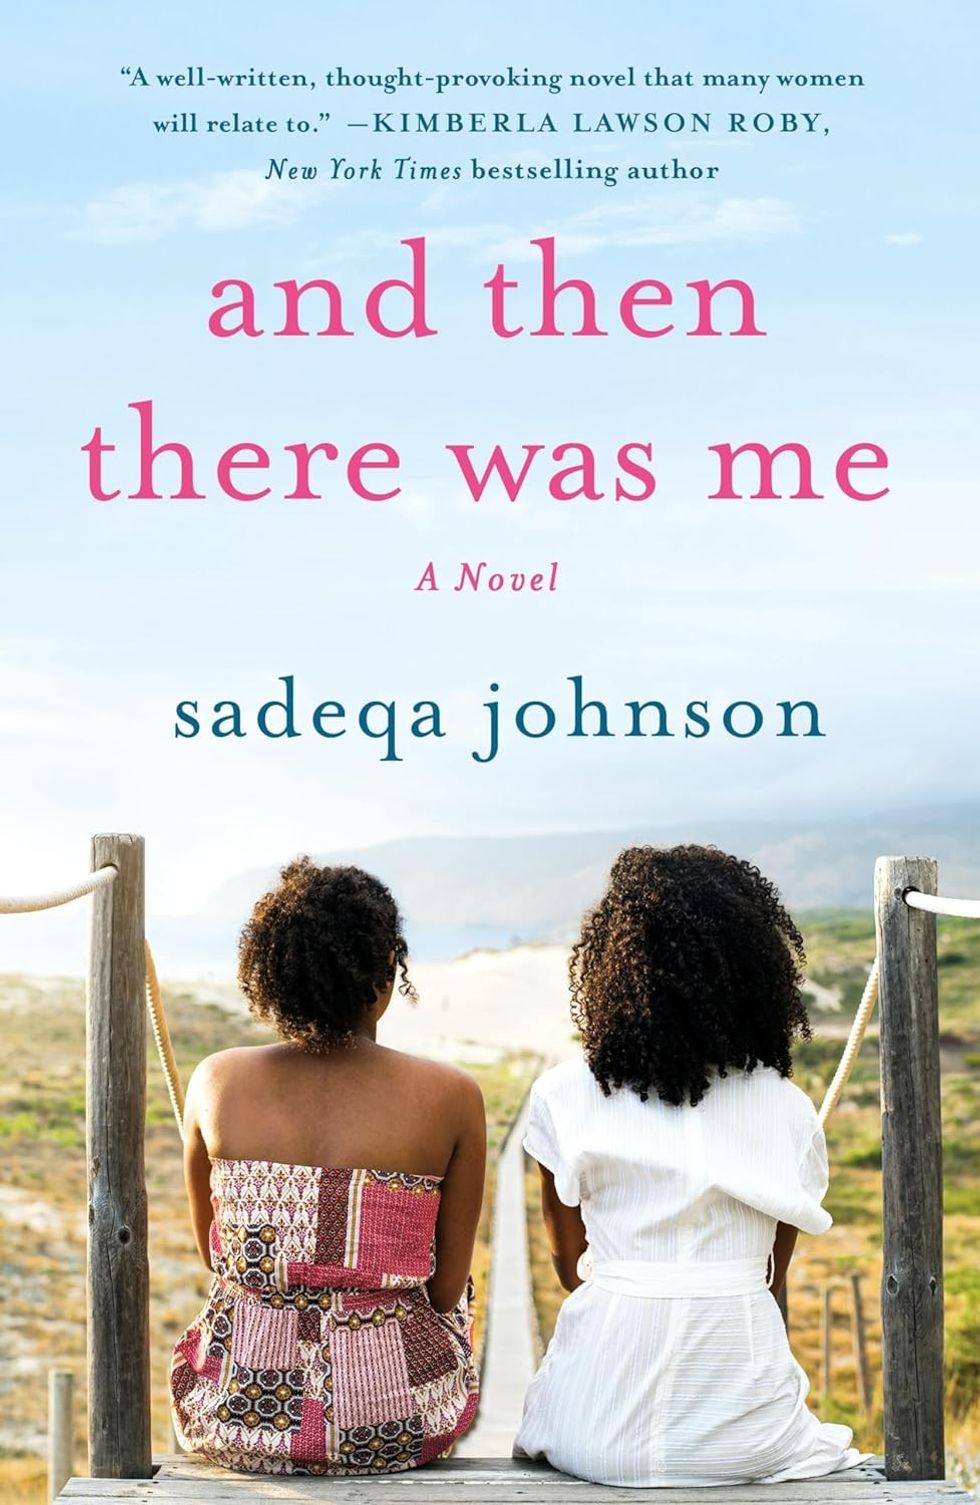 "And Then There Was Me" by Sadeqa Jackson